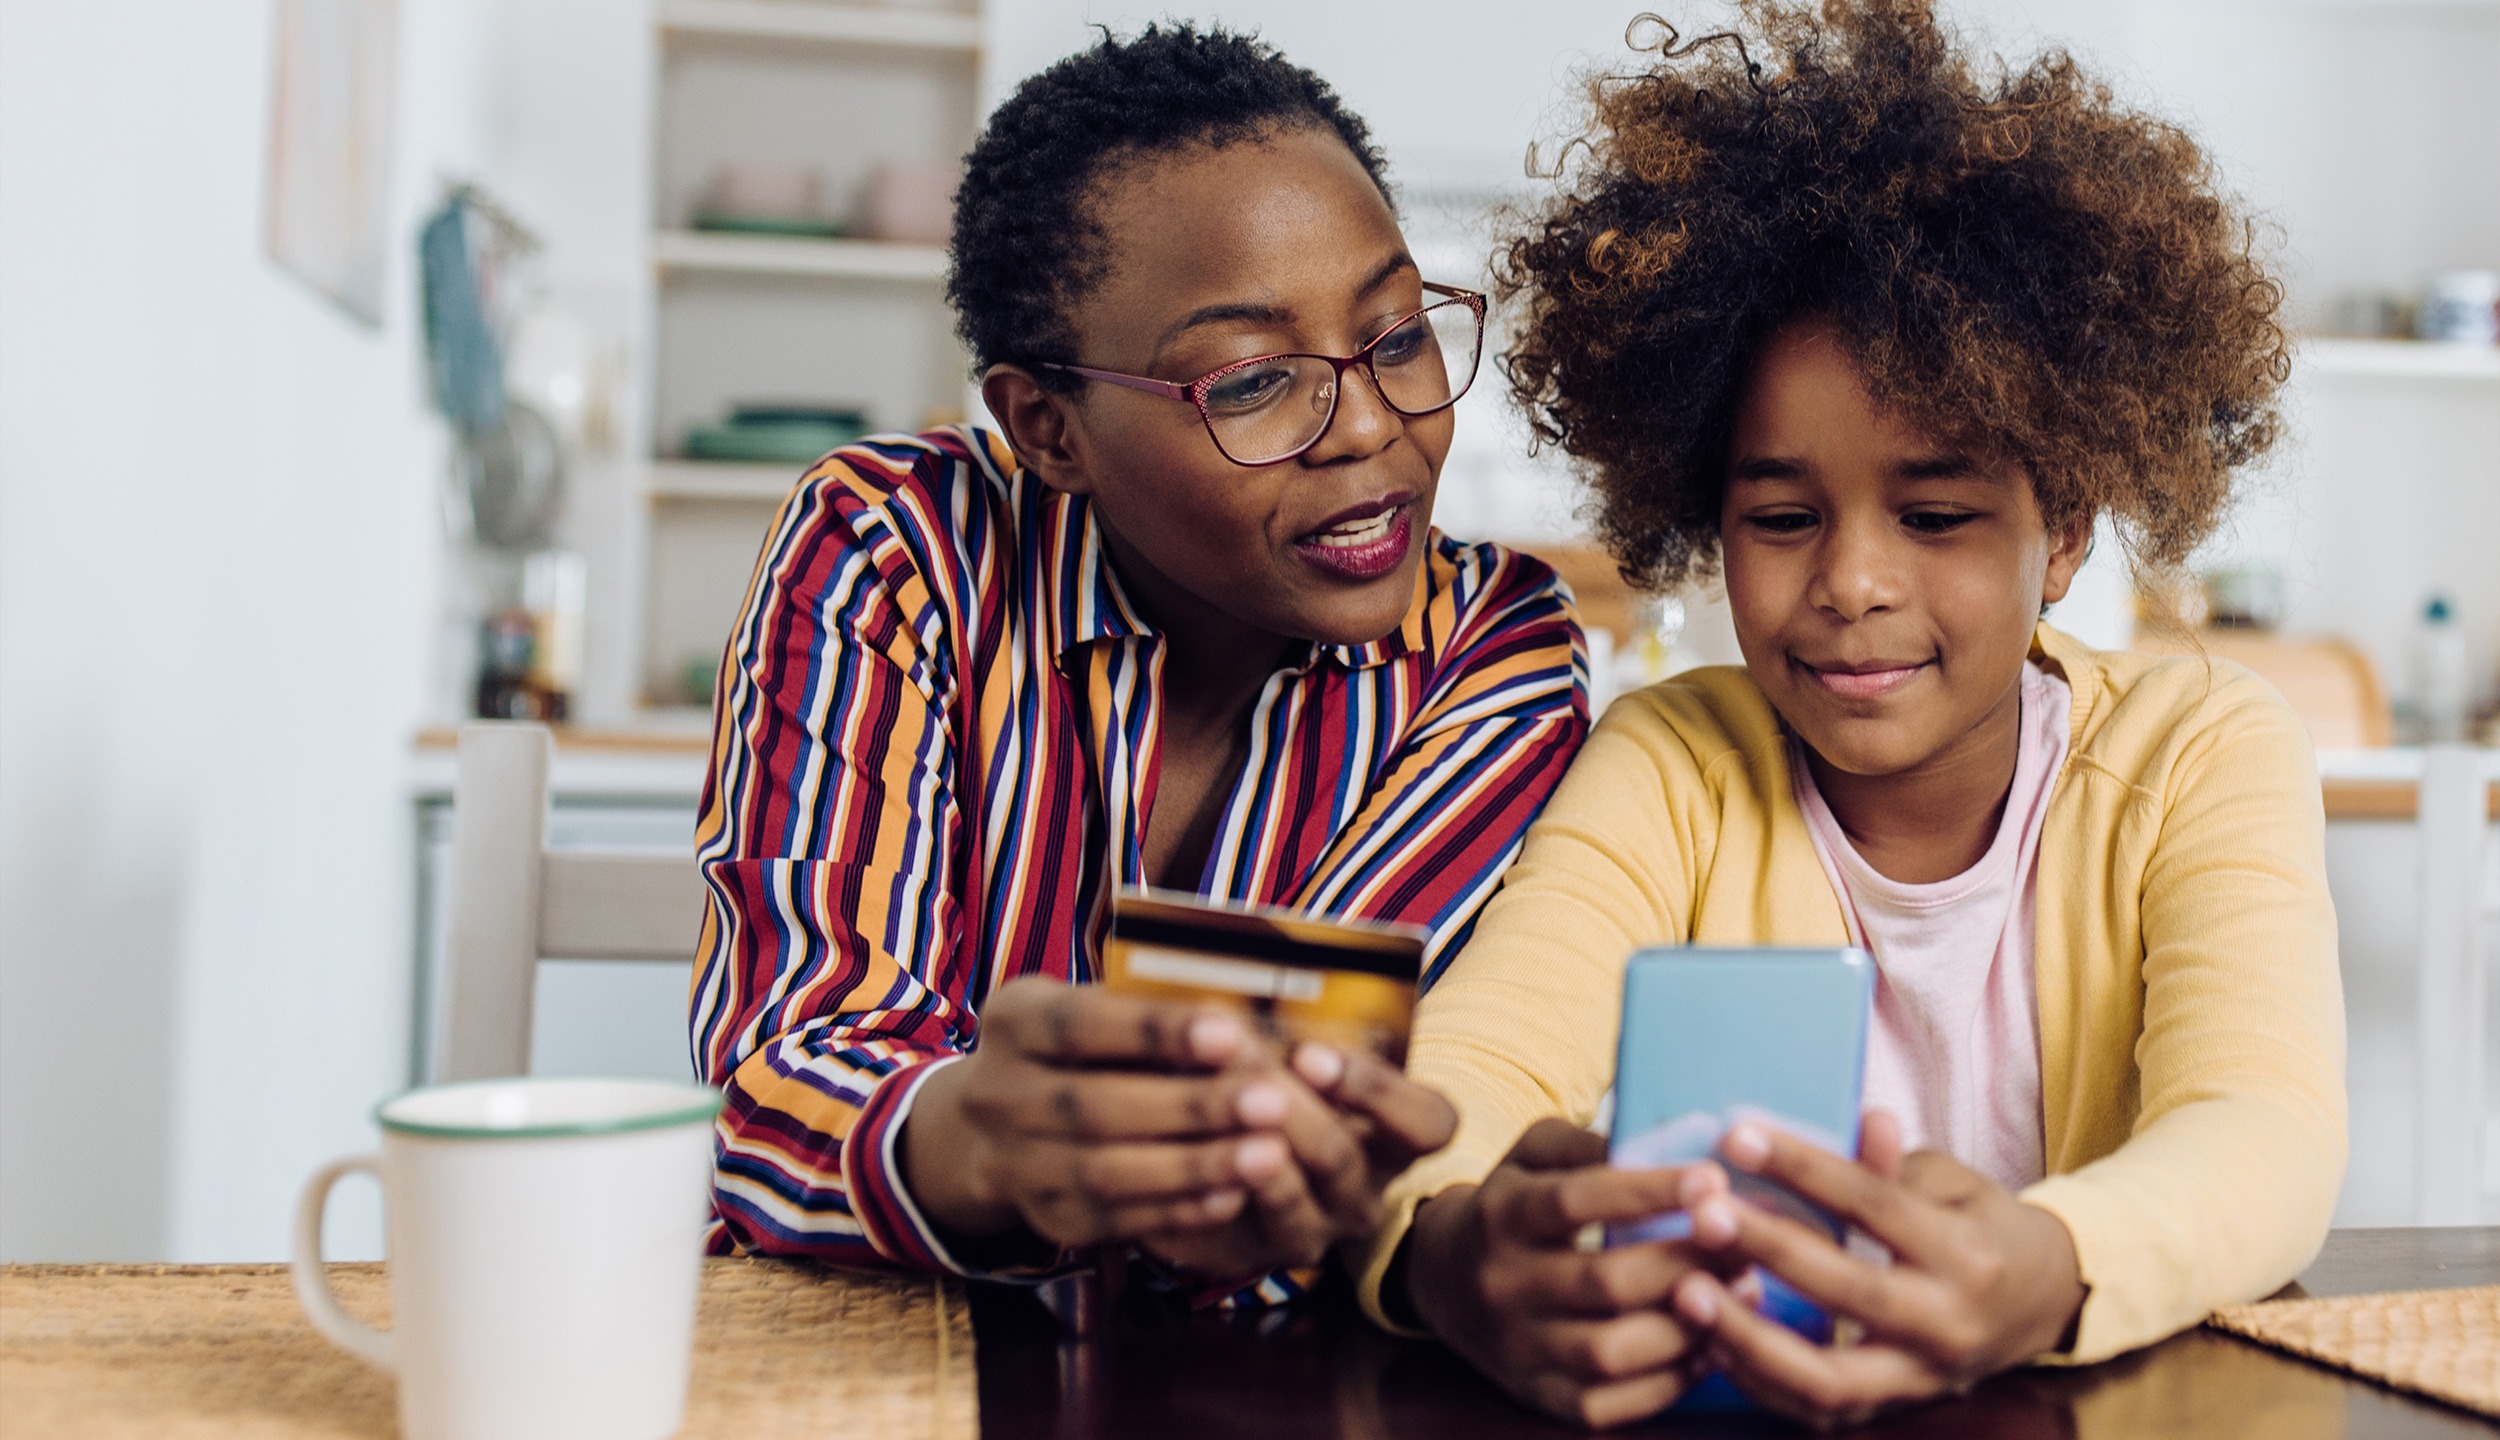 A parent's child helping them use a mobile banking app on a phone